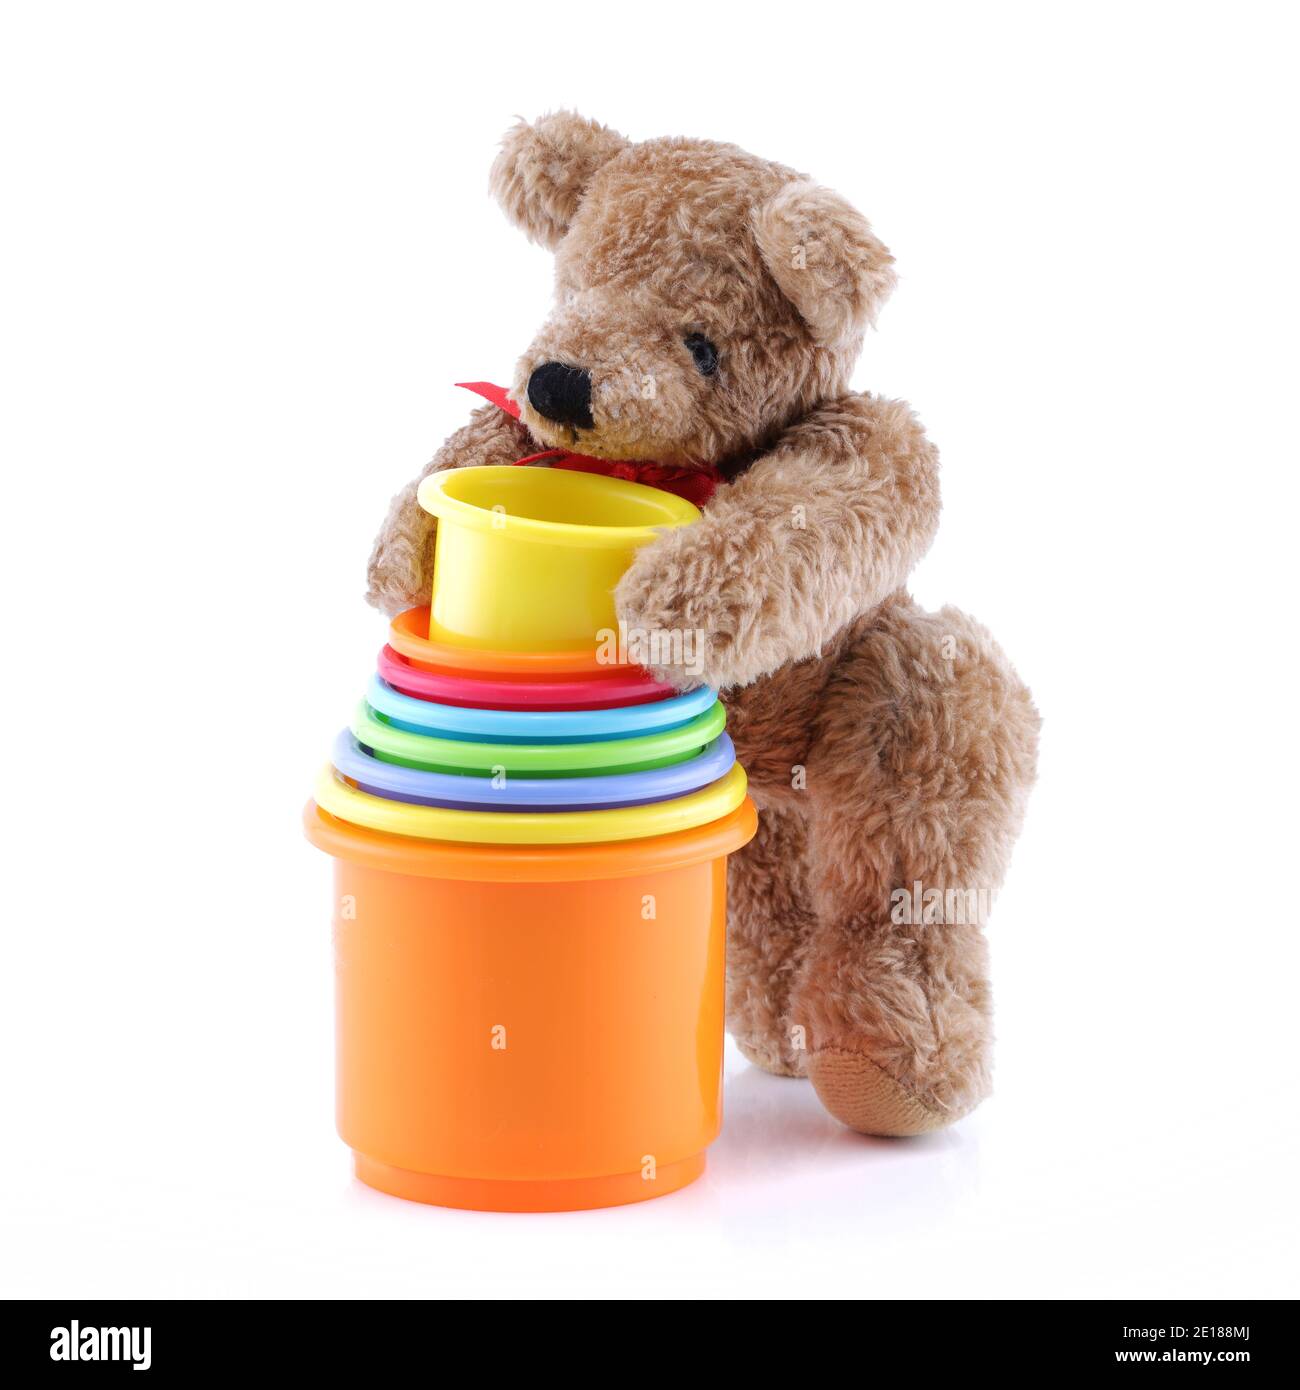 Brown teddy bear playing with toy pots containers Stock Photo